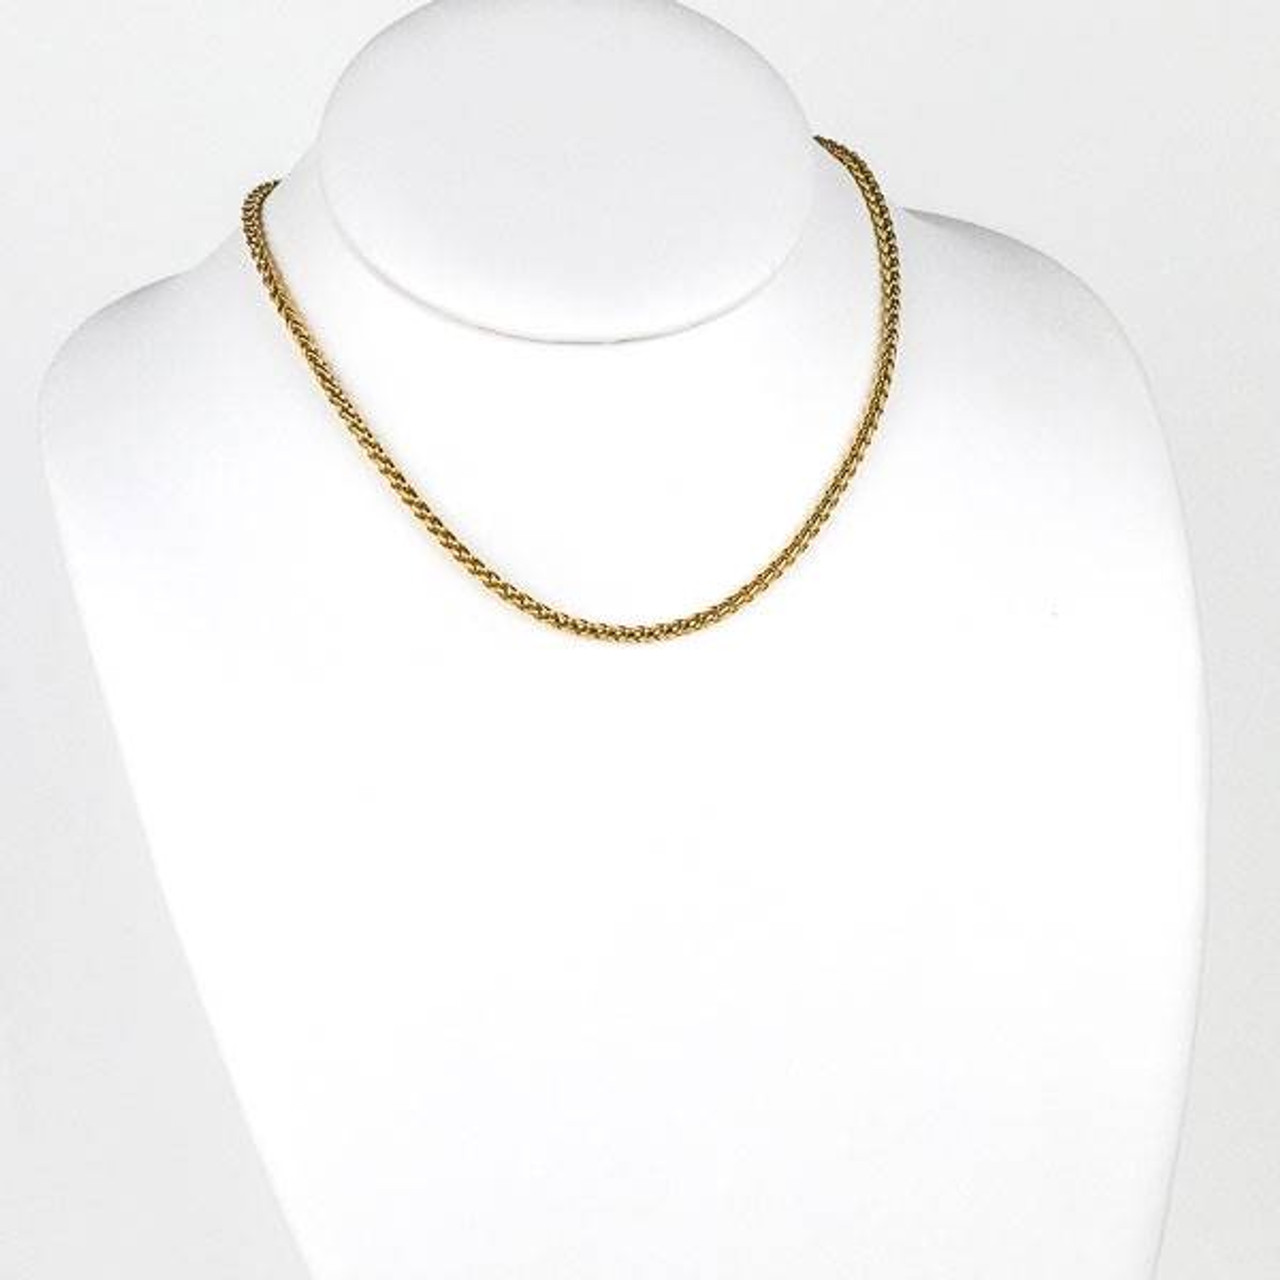 Buy Solid Gold Chain Necklace, 14k Yellow Gold, White Gold, Figaro Chain,  Gold Choker, Layering Chain, Long Gold Chain, Charm Necklace, Suzanne  Online in India - Etsy